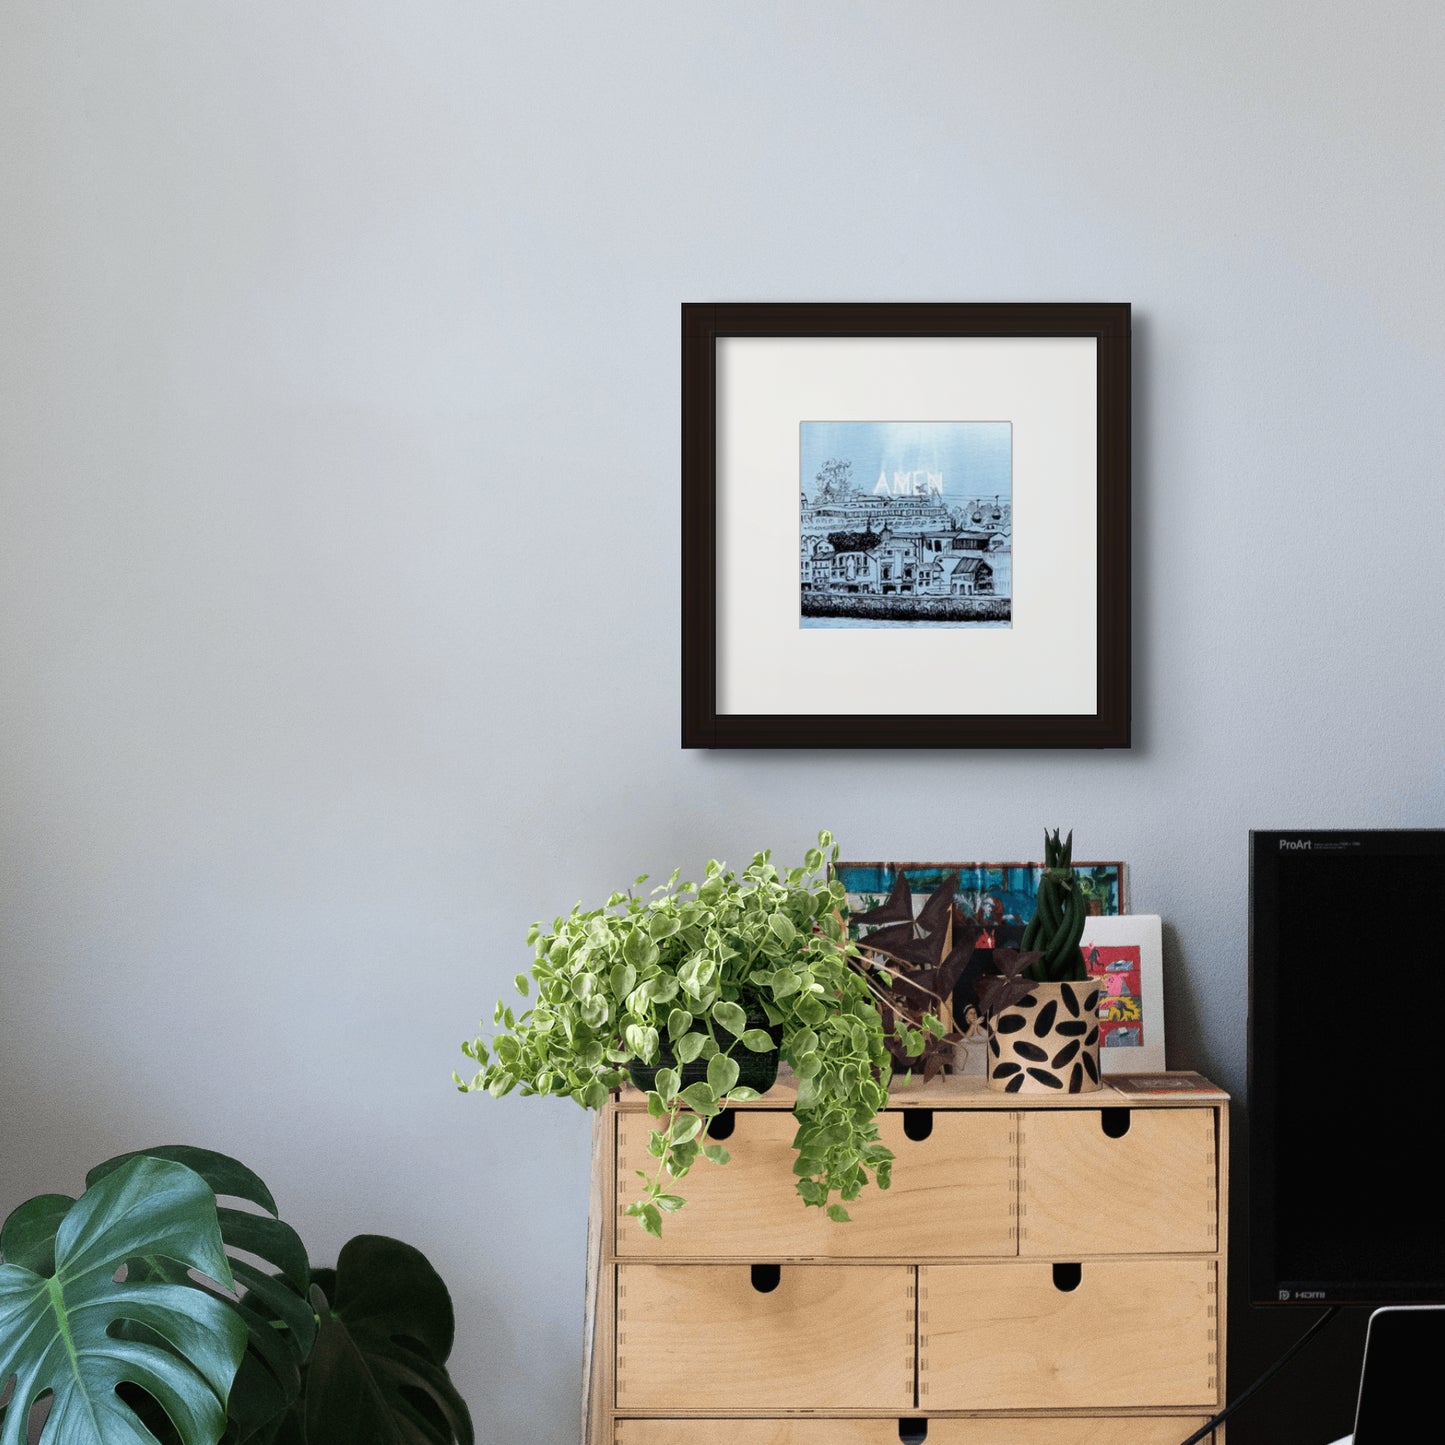 6” x 6” giclée art print with black frame and cream colour mat, in a home office setting. Scenery of Gaia, with old buildings and cable car, seen from Riberia, Porto, Portugal, in line drawing with watercolour. 